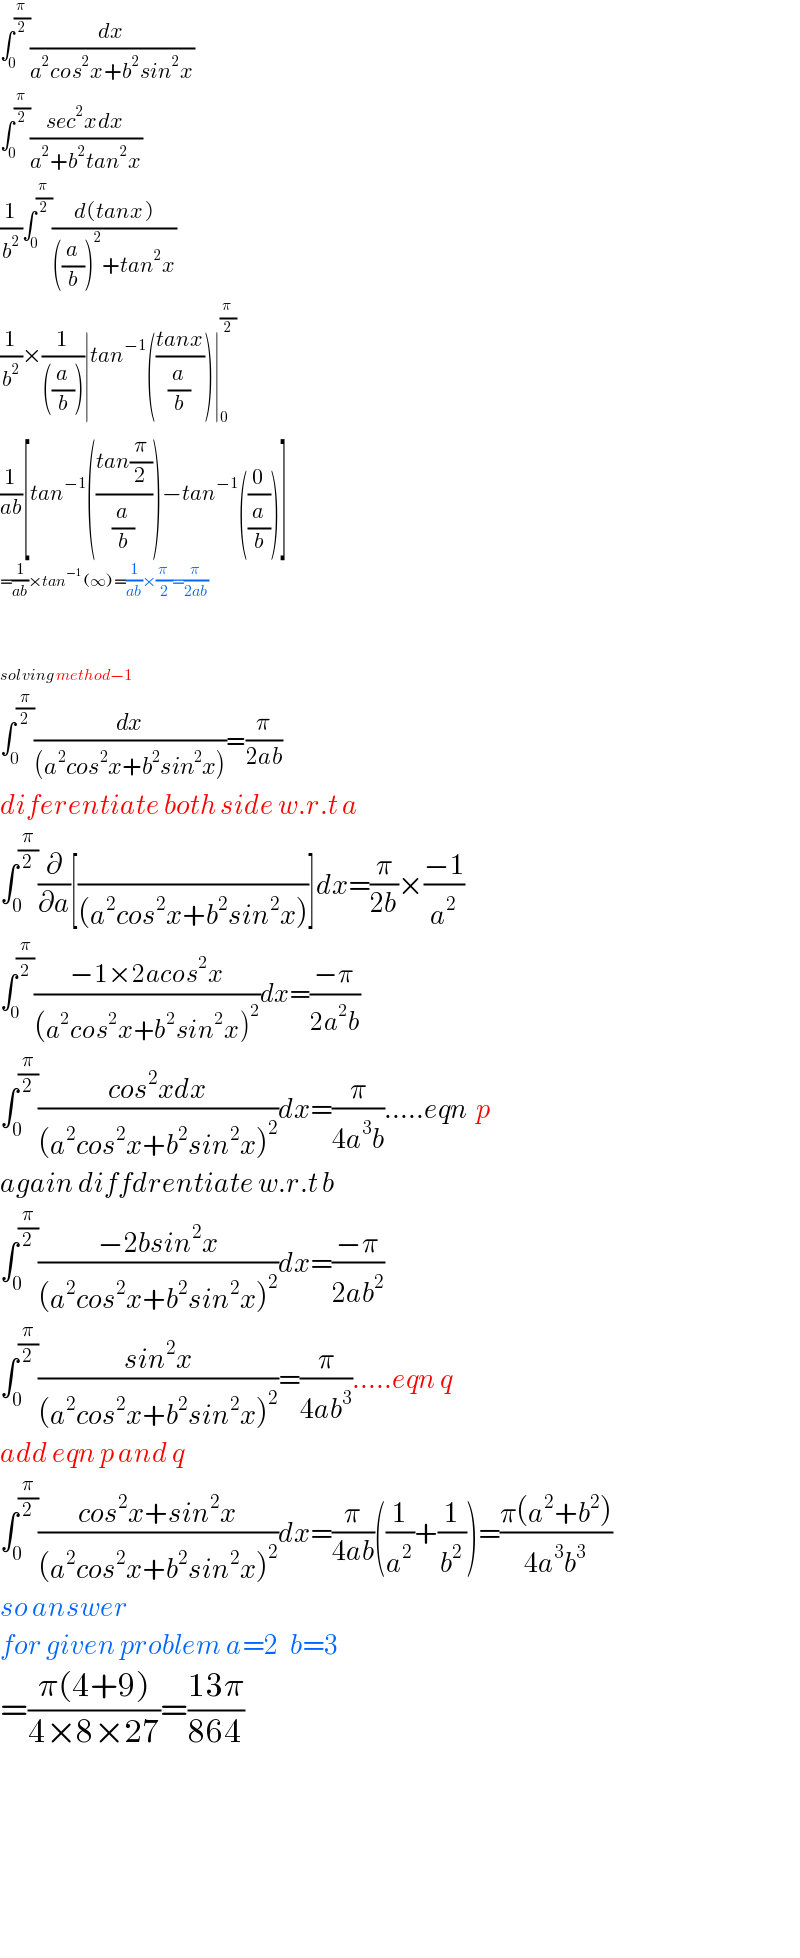 ∫_0 ^(π/2) (dx/(a^2 cos^2 x+b^2 sin^2 x))  ∫_0 ^(π/2) ((sec^2 xdx)/(a^2 +b^2 tan^2 x))  (1/b^2 )∫_0 ^(π/2) ((d(tanx))/(((a/b))^2 +tan^2 x))  (1/b^2 )×(1/(((a/b))))∣tan^(−1) (((tanx)/(a/b)))∣_0 ^(π/2)   (1/(ab))[tan^(−1) (((tan(π/2))/(a/b)))−tan^(−1) ((0/(a/b)))]  =(1/(ab))×tan^(−1) (∞)=(1/(ab))×(π/2)=(π/(2ab))    solving method−1  ∫_0 ^(π/2) (dx/((a^2 cos^2 x+b^2 sin^2 x)))=(π/(2ab))  diferentiate both side w.r.t a  ∫_0 ^(π/2) (∂/∂a)[(/((a^2 cos^2 x+b^2 sin^2 x)))]dx=(π/(2b))×((−1)/a^2 )  ∫_0 ^(π/2) ((−1×2acos^2 x)/((a^2 cos^2 x+b^2 sin^2 x)^2 ))dx=((−π)/(2a^2 b))  ∫_0 ^(π/2) ((cos^2 xdx)/((a^2 cos^2 x+b^2 sin^2 x)^2 ))dx=(π/(4a^3 b)).....eqn  p  again diffdrentiate w.r.t b  ∫_0 ^(π/2) ((−2bsin^2 x)/((a^2 cos^2 x+b^2 sin^2 x)^2 ))dx=((−π)/(2ab^2 ))  ∫_0 ^(π/2) ((sin^2 x)/((a^2 cos^2 x+b^2 sin^2 x)^2 ))=(π/(4ab^3 )).....eqn q  add eqn p and q  ∫_0 ^(π/2) ((cos^2 x+sin^2 x)/((a^2 cos^2 x+b^2 sin^2 x)^2 ))dx=(π/(4ab))((1/a^2 )+(1/b^2 ))=((π(a^2 +b^2 ))/(4a^3 b^3 ))  so answer  for given problem a=2   b=3  =((π(4+9))/(4×8×27))=((13π)/(864))              